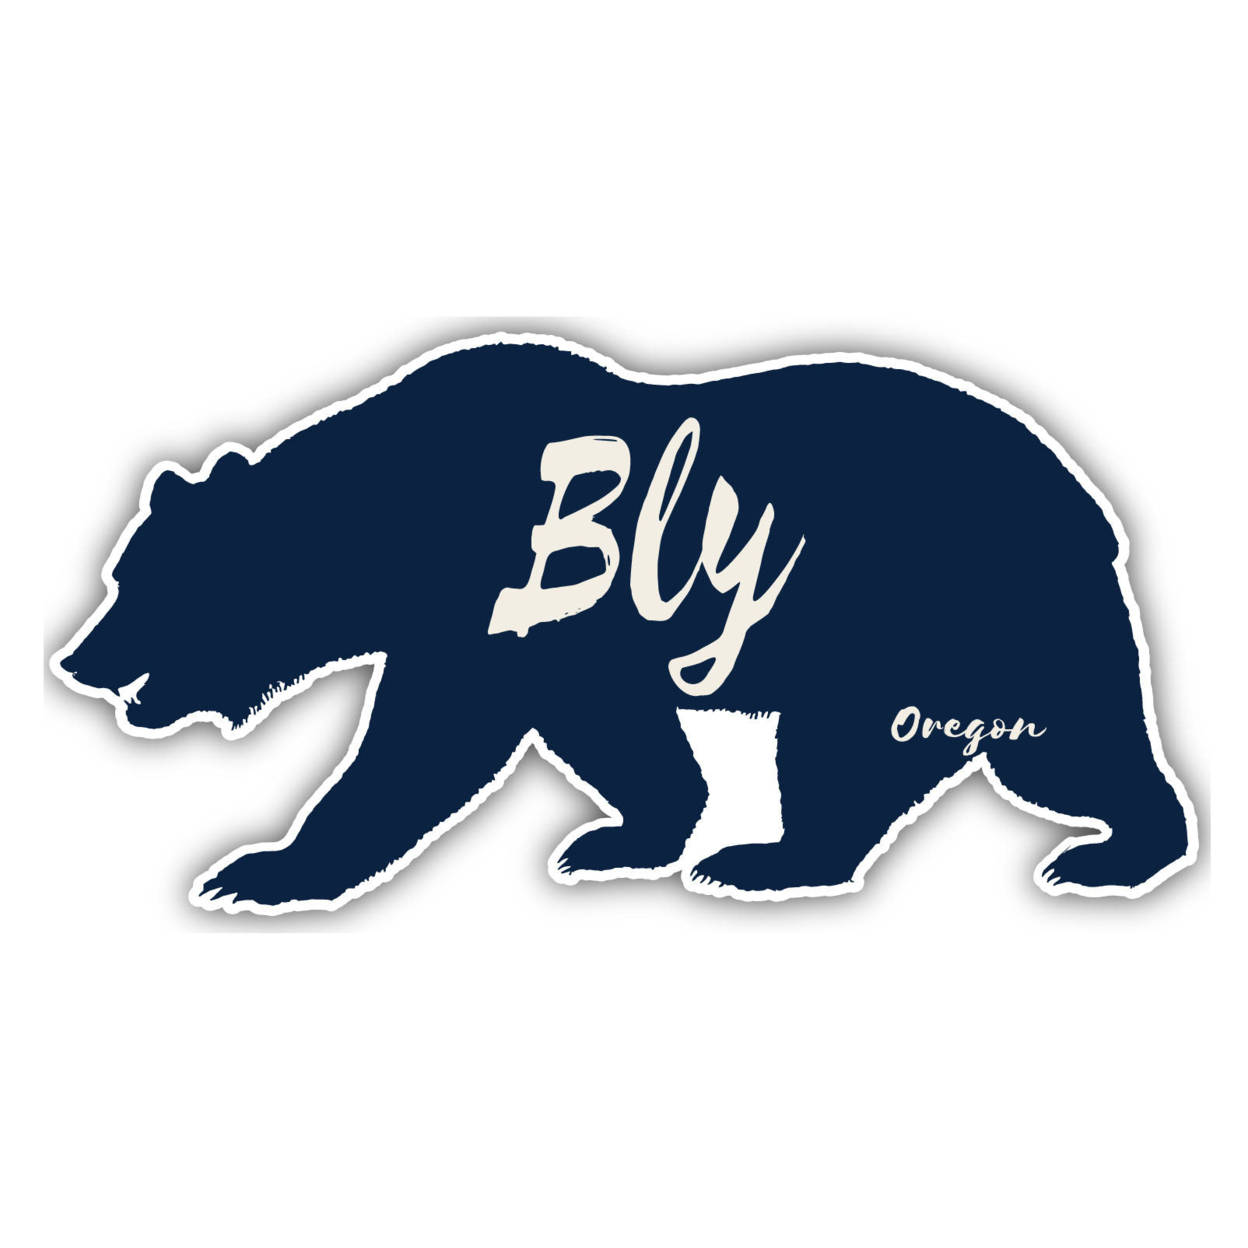 Bly Oregon Souvenir Decorative Stickers (Choose Theme And Size) - 4-Pack, 12-Inch, Great Outdoors